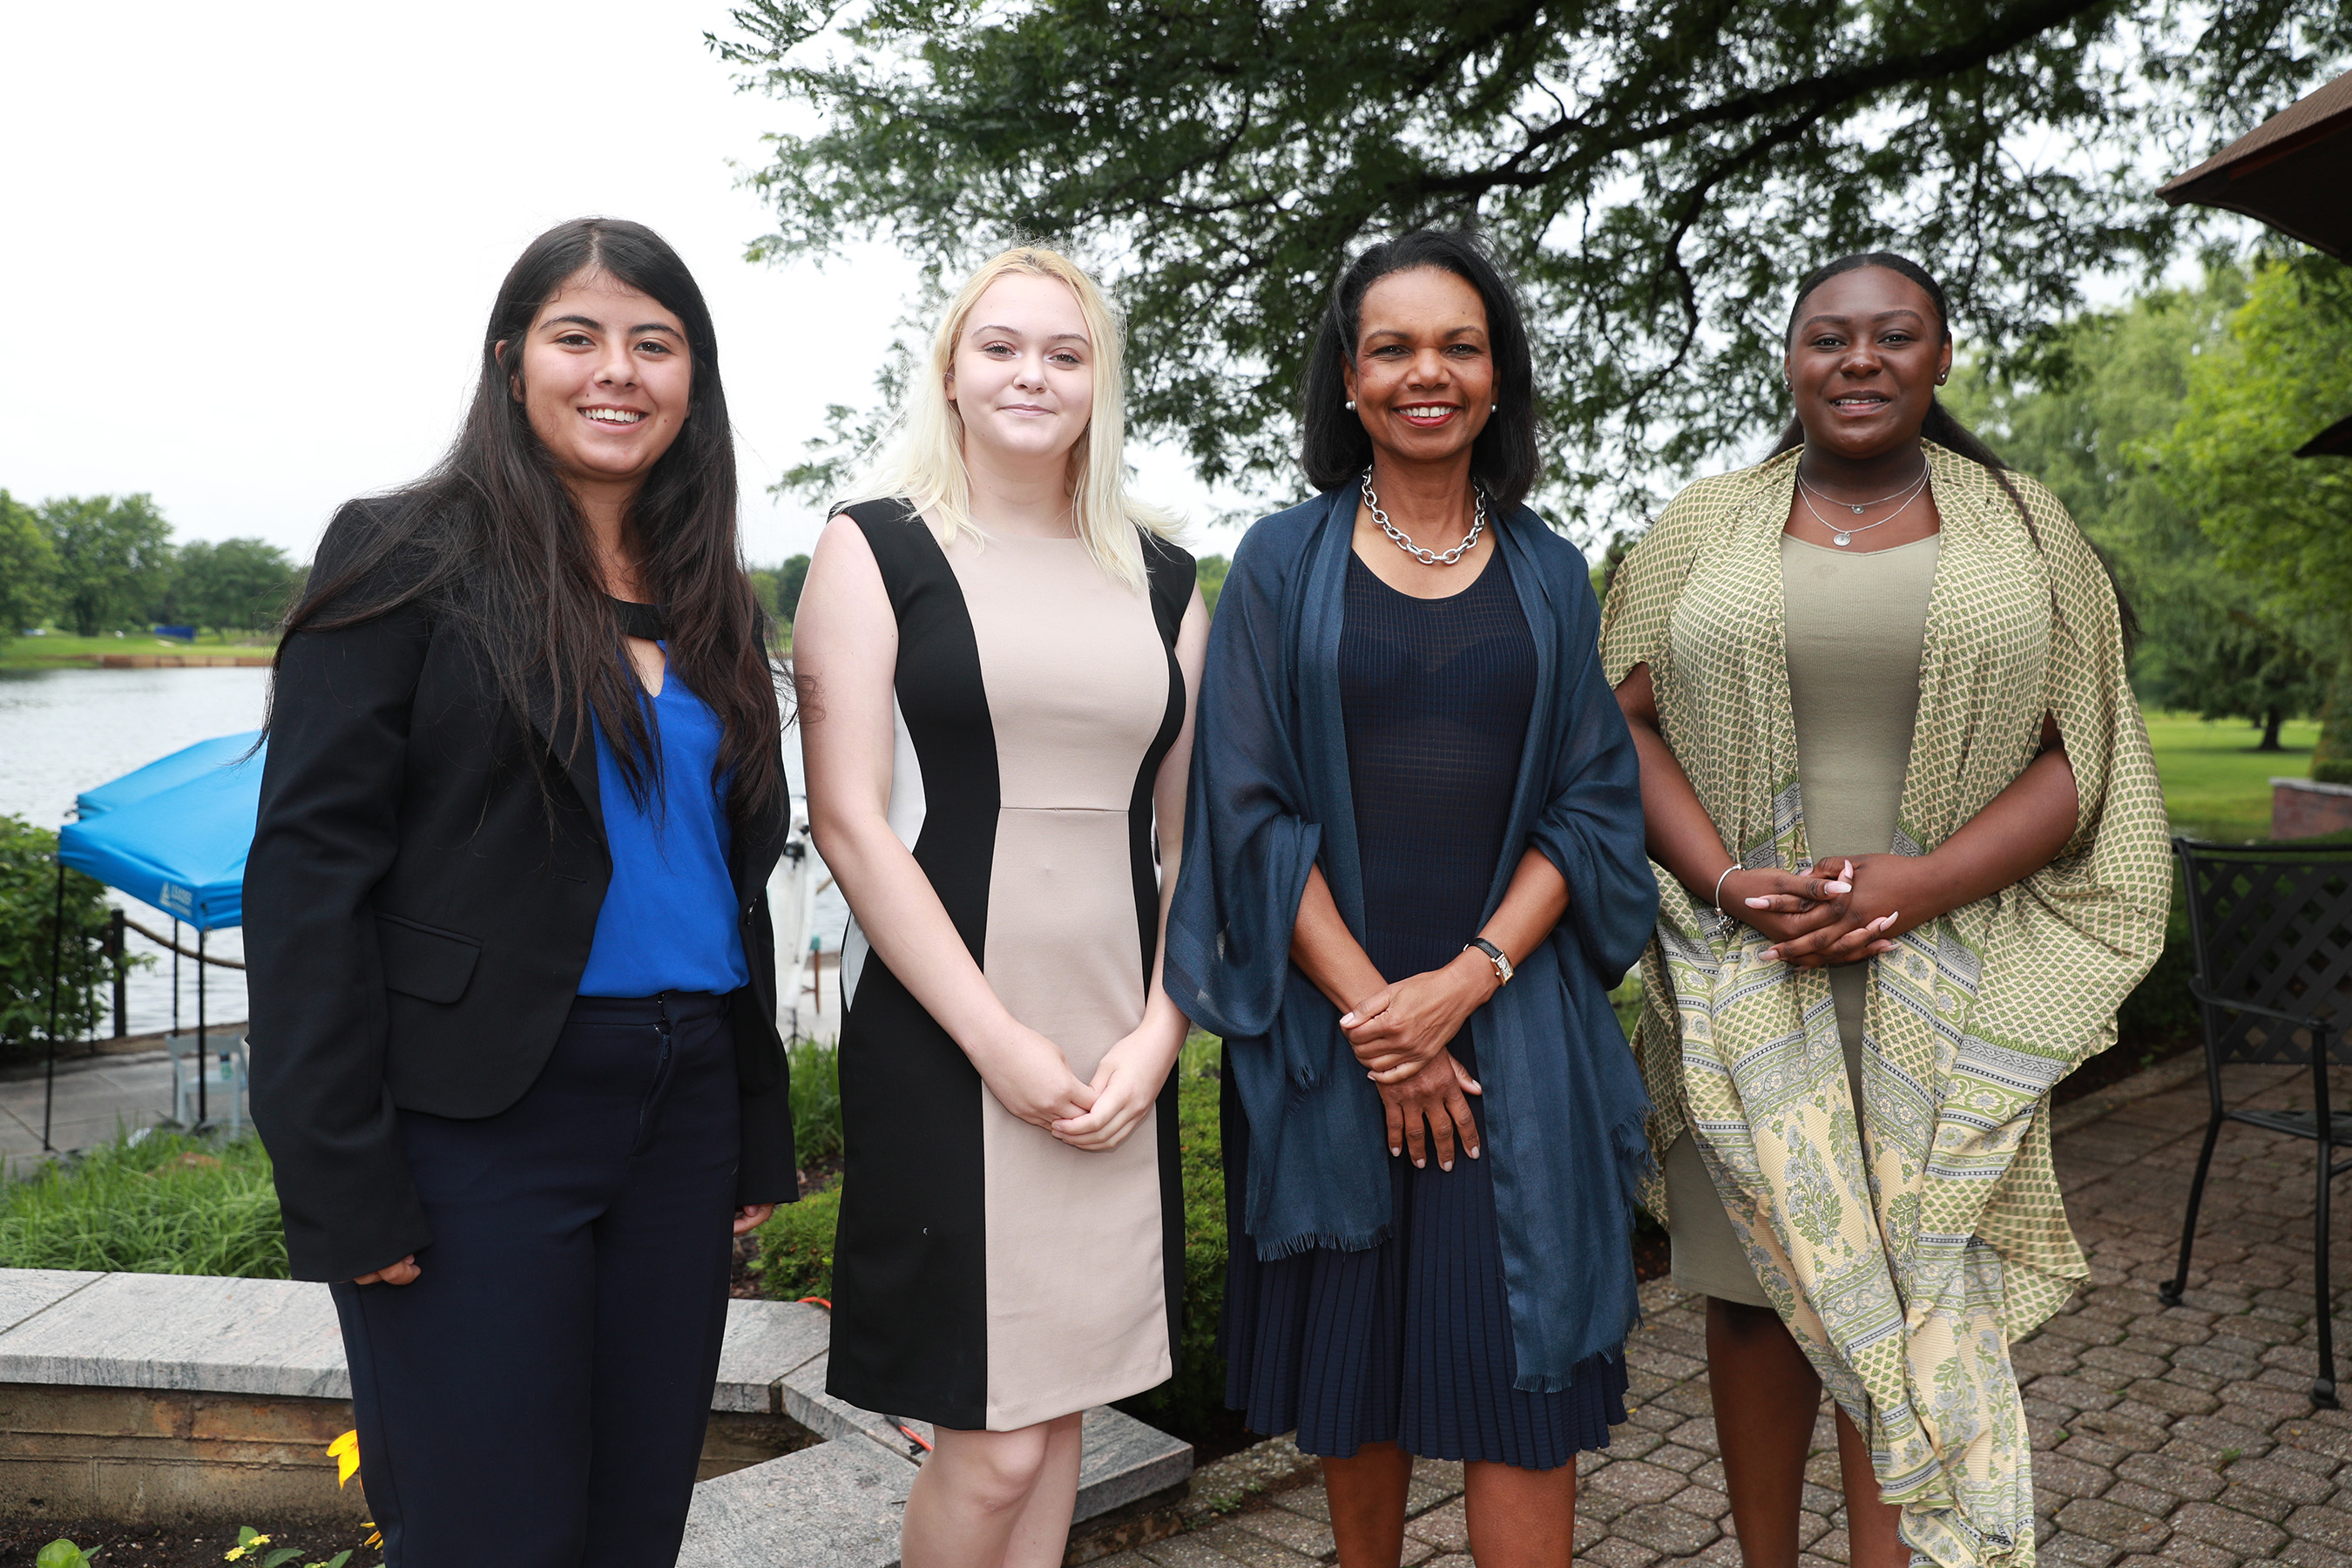 Dr. Condoleezza Rice poses with representatives from the Future Leaders Program Class of 2018